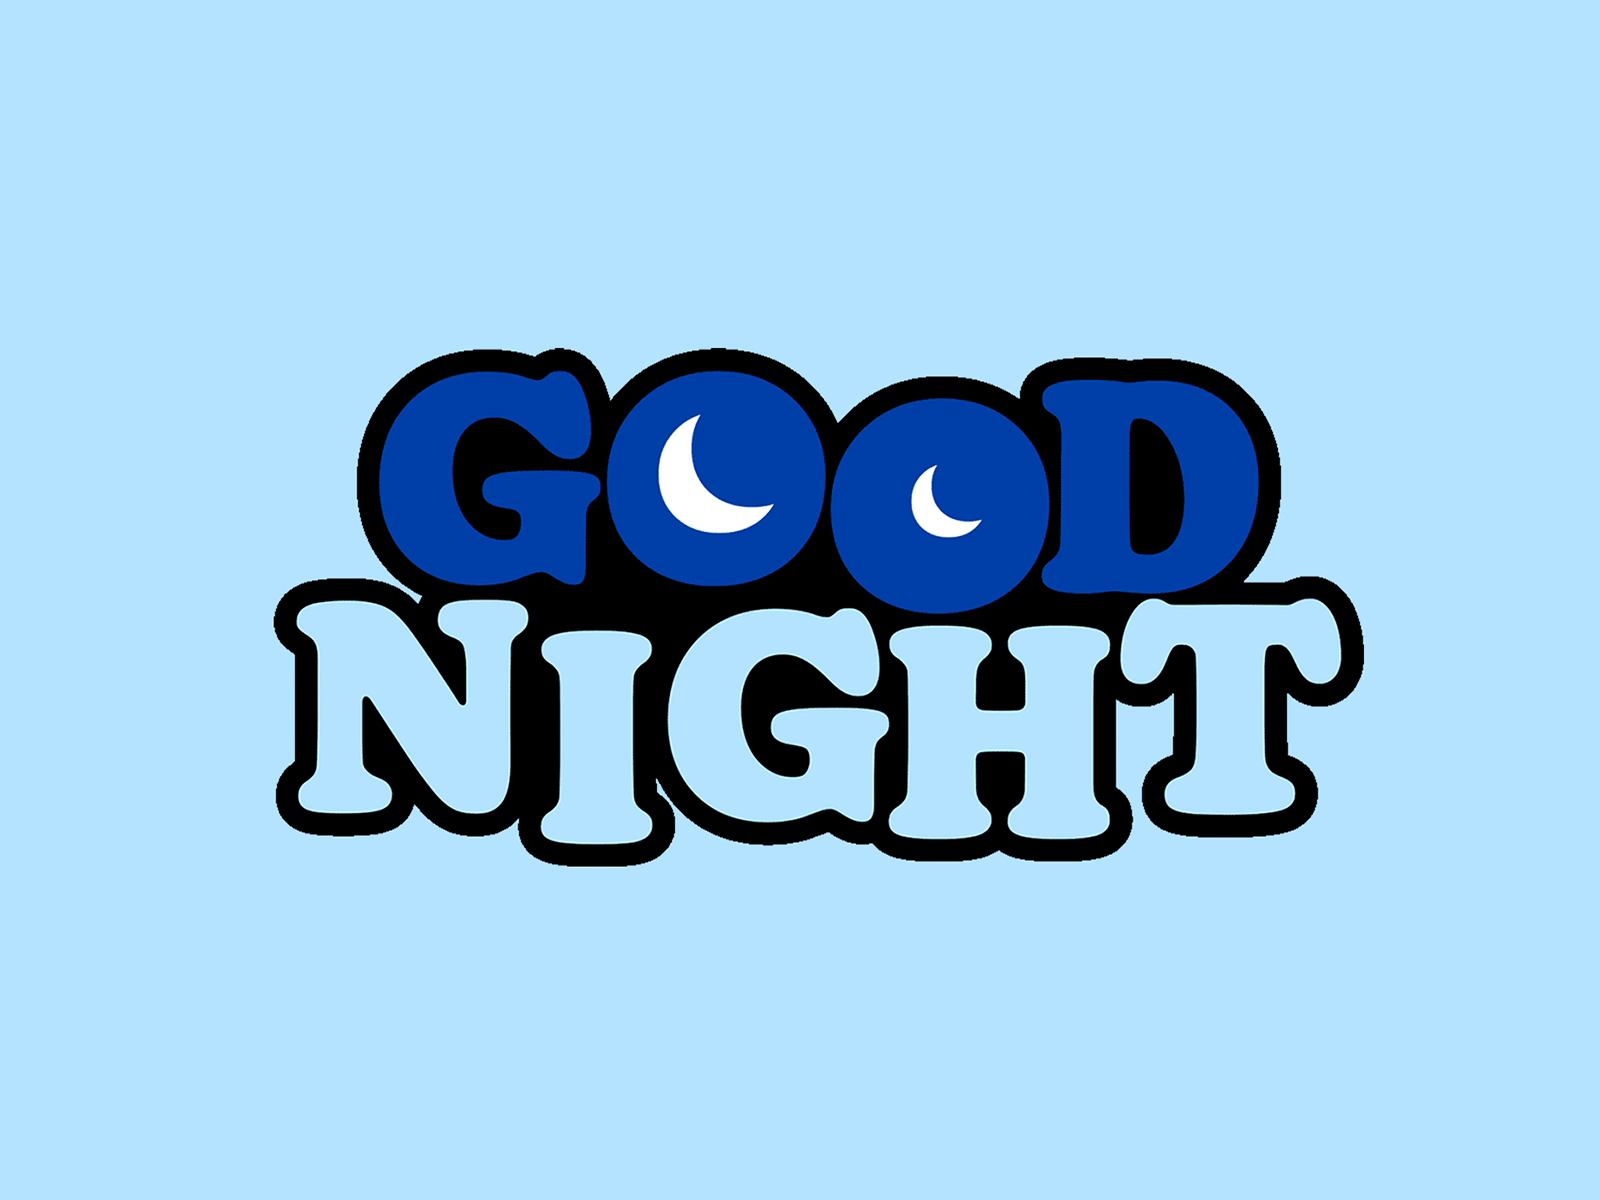 GOOD NIGHT by Mat Voyce on Dribbble